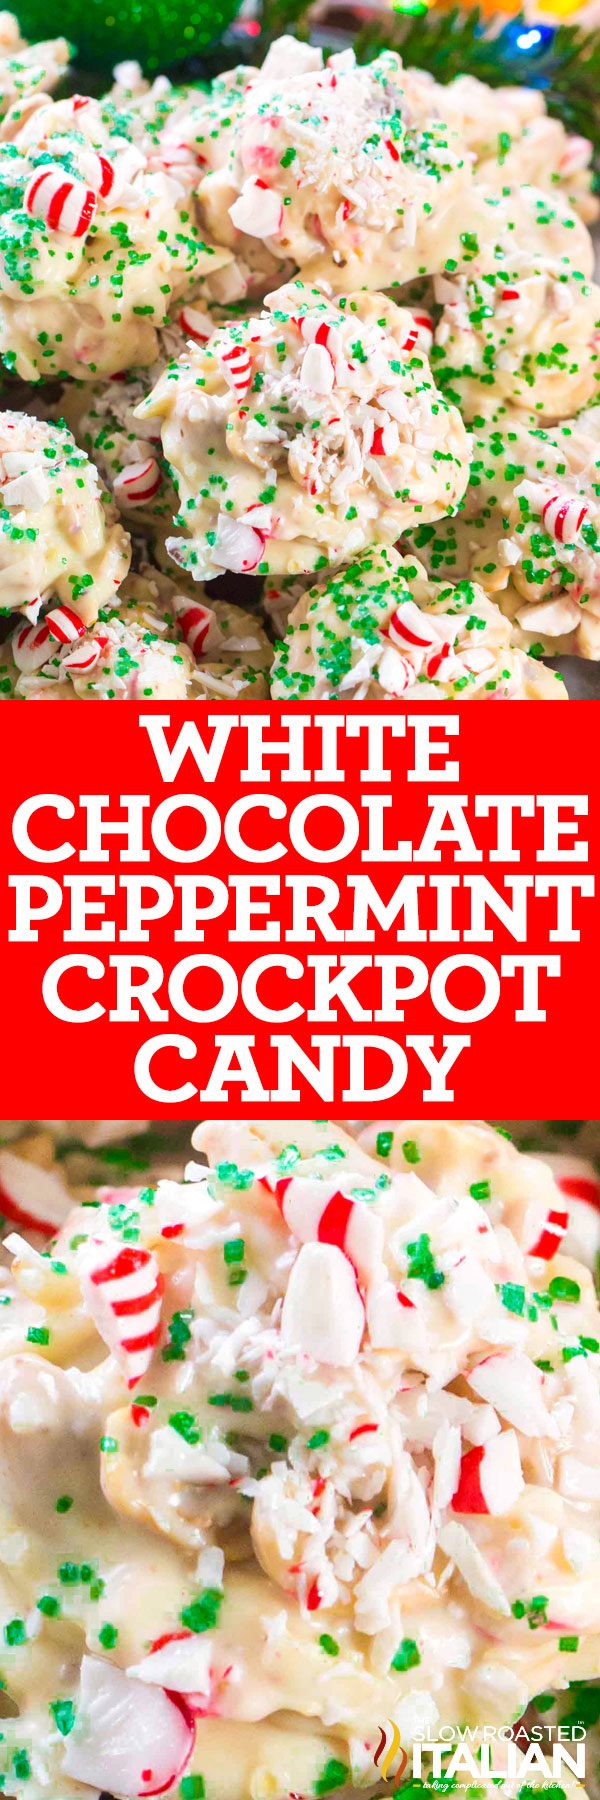 white chocolate peppermint crockpot candy